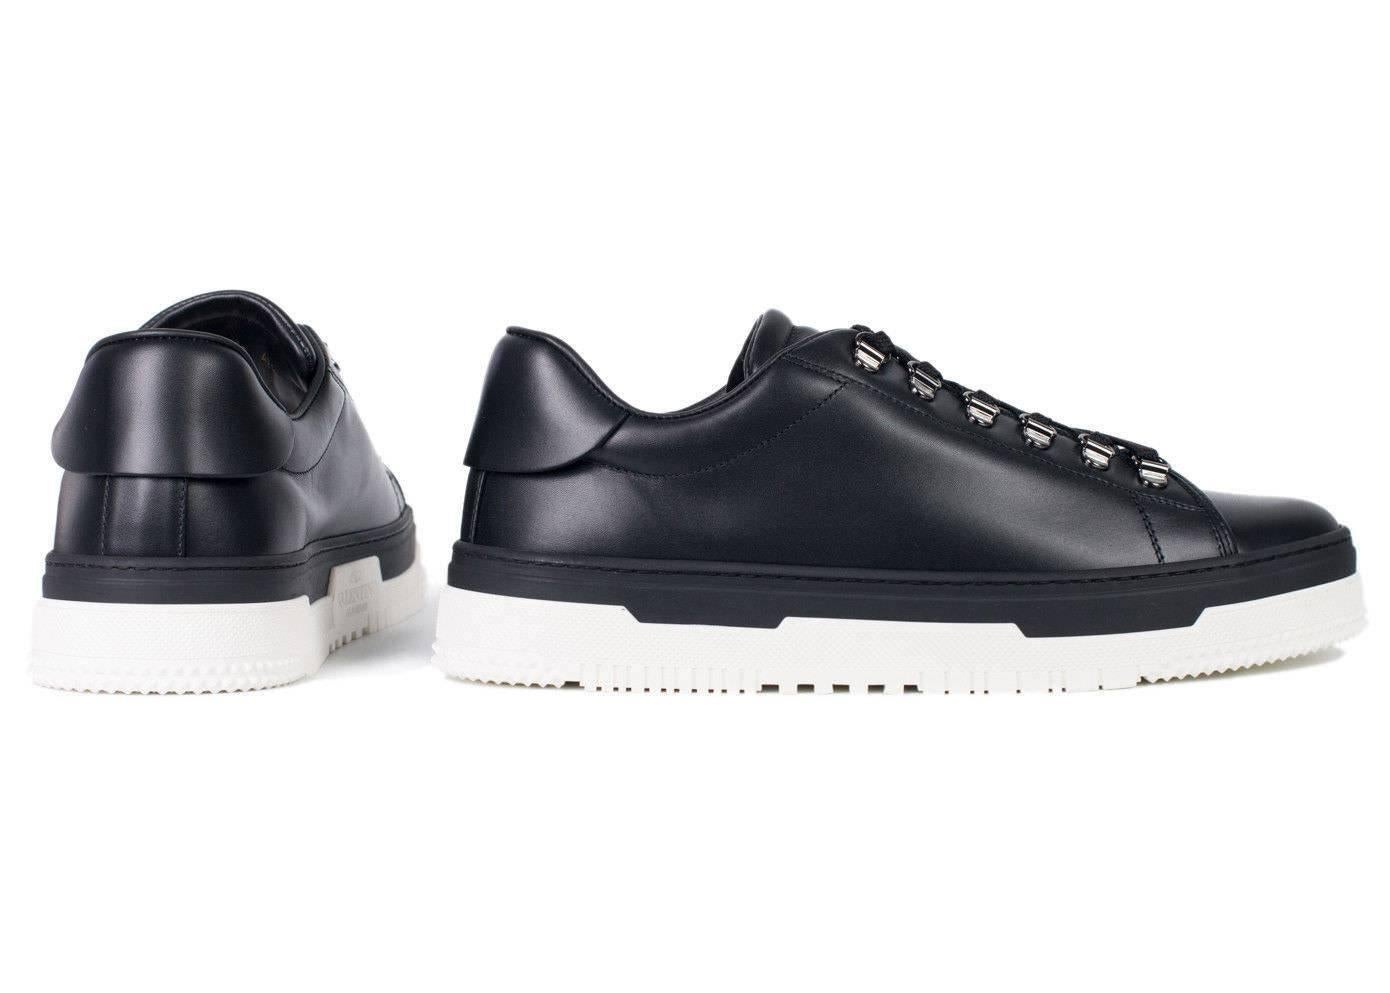 The Valentino Lace Up Platform sneakers are the new modern. This shoe features a futuristic dual black and white rugged sole paired with smooth leather. You can combine this shoe with all black denim and take on the day.

Composition Leather
Low